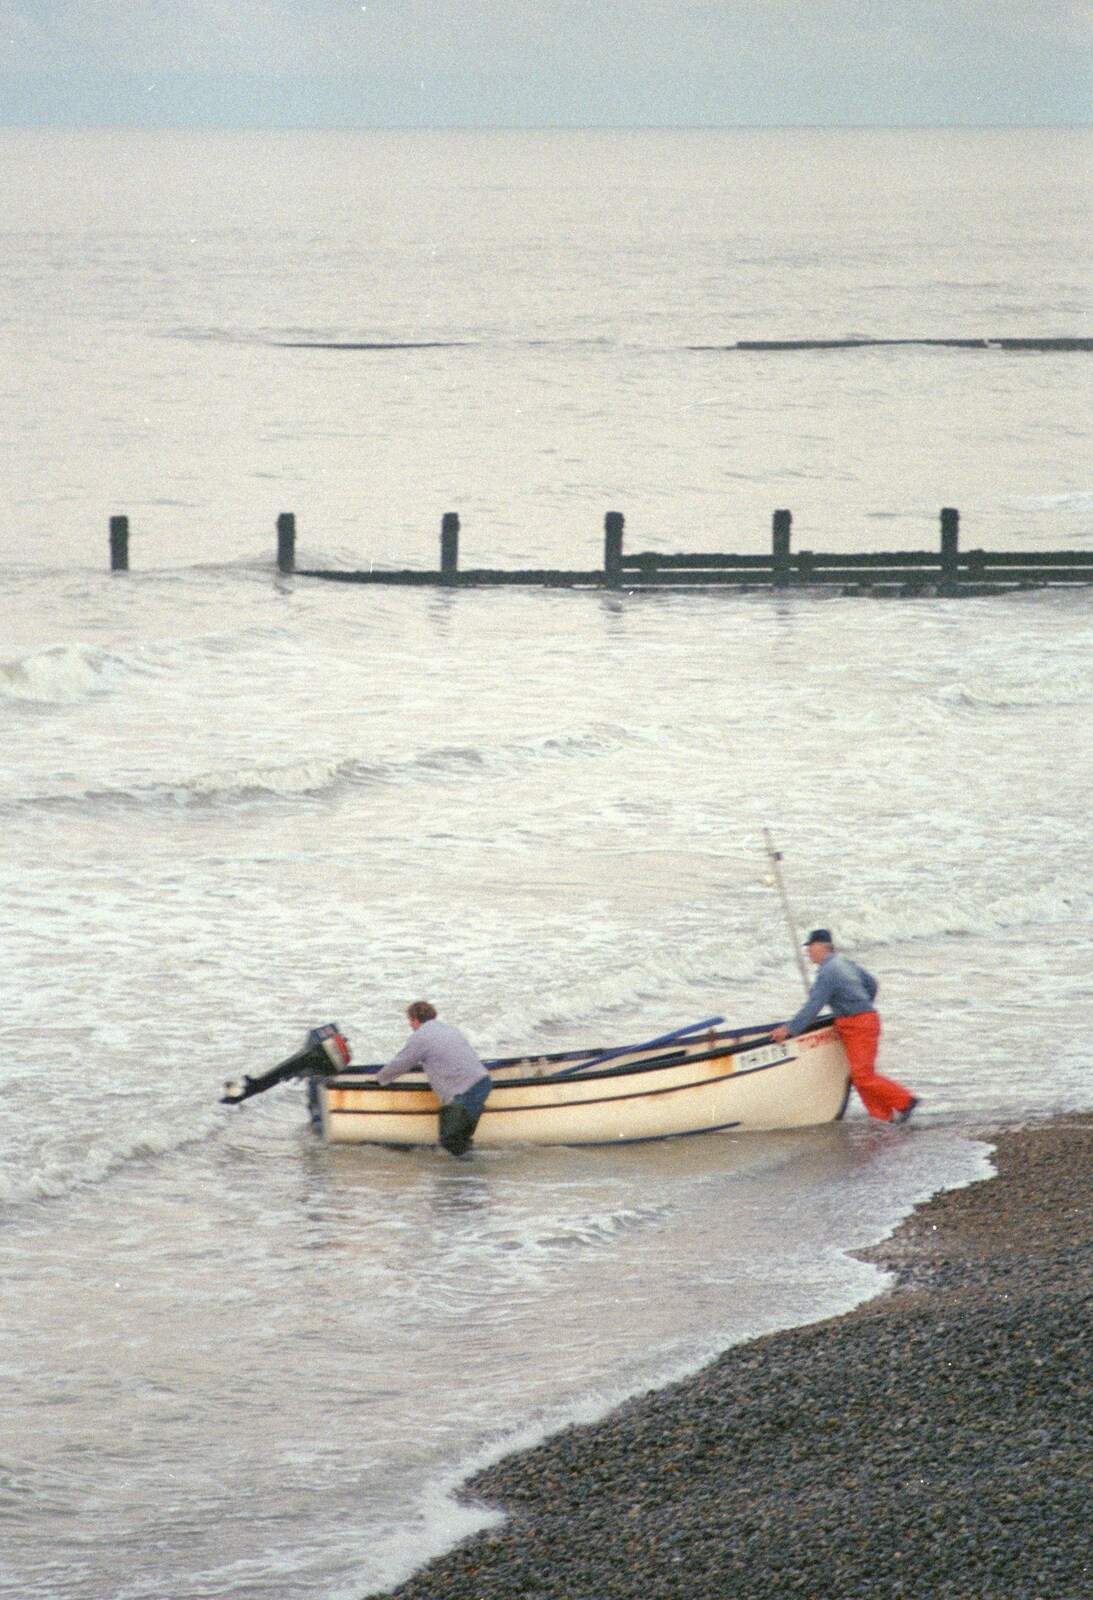 A couple of fishermen put to sea from A Visit to Sheringham, North Norfolk - 20th November 1987